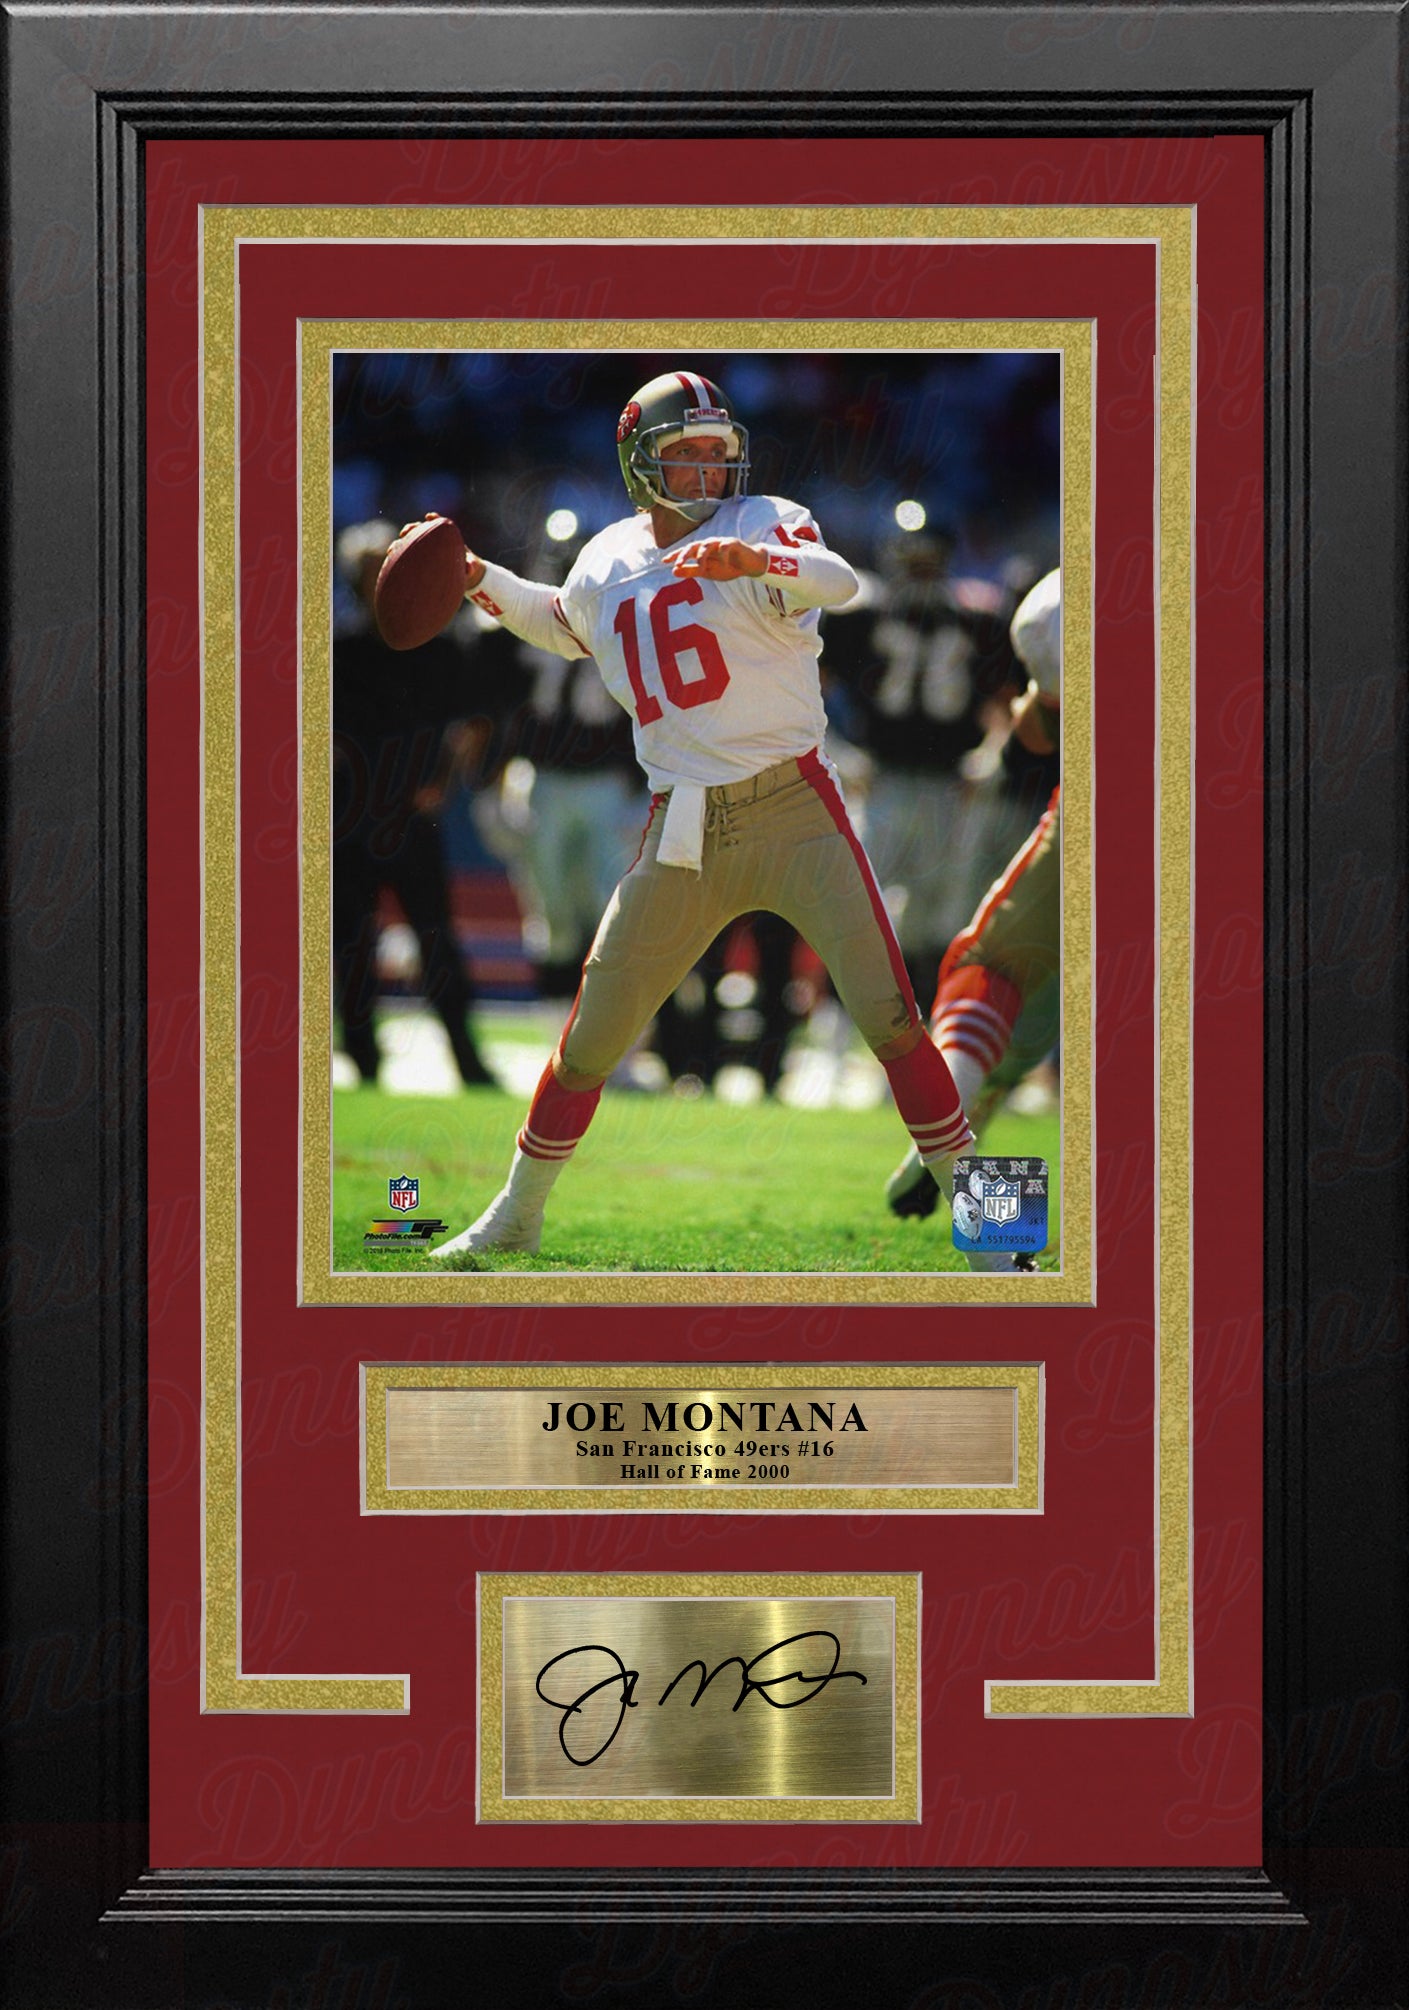 Joe Montana in Action San Francisco 49ers 8' x 10' Framed Football Photo  with Engraved Autograph